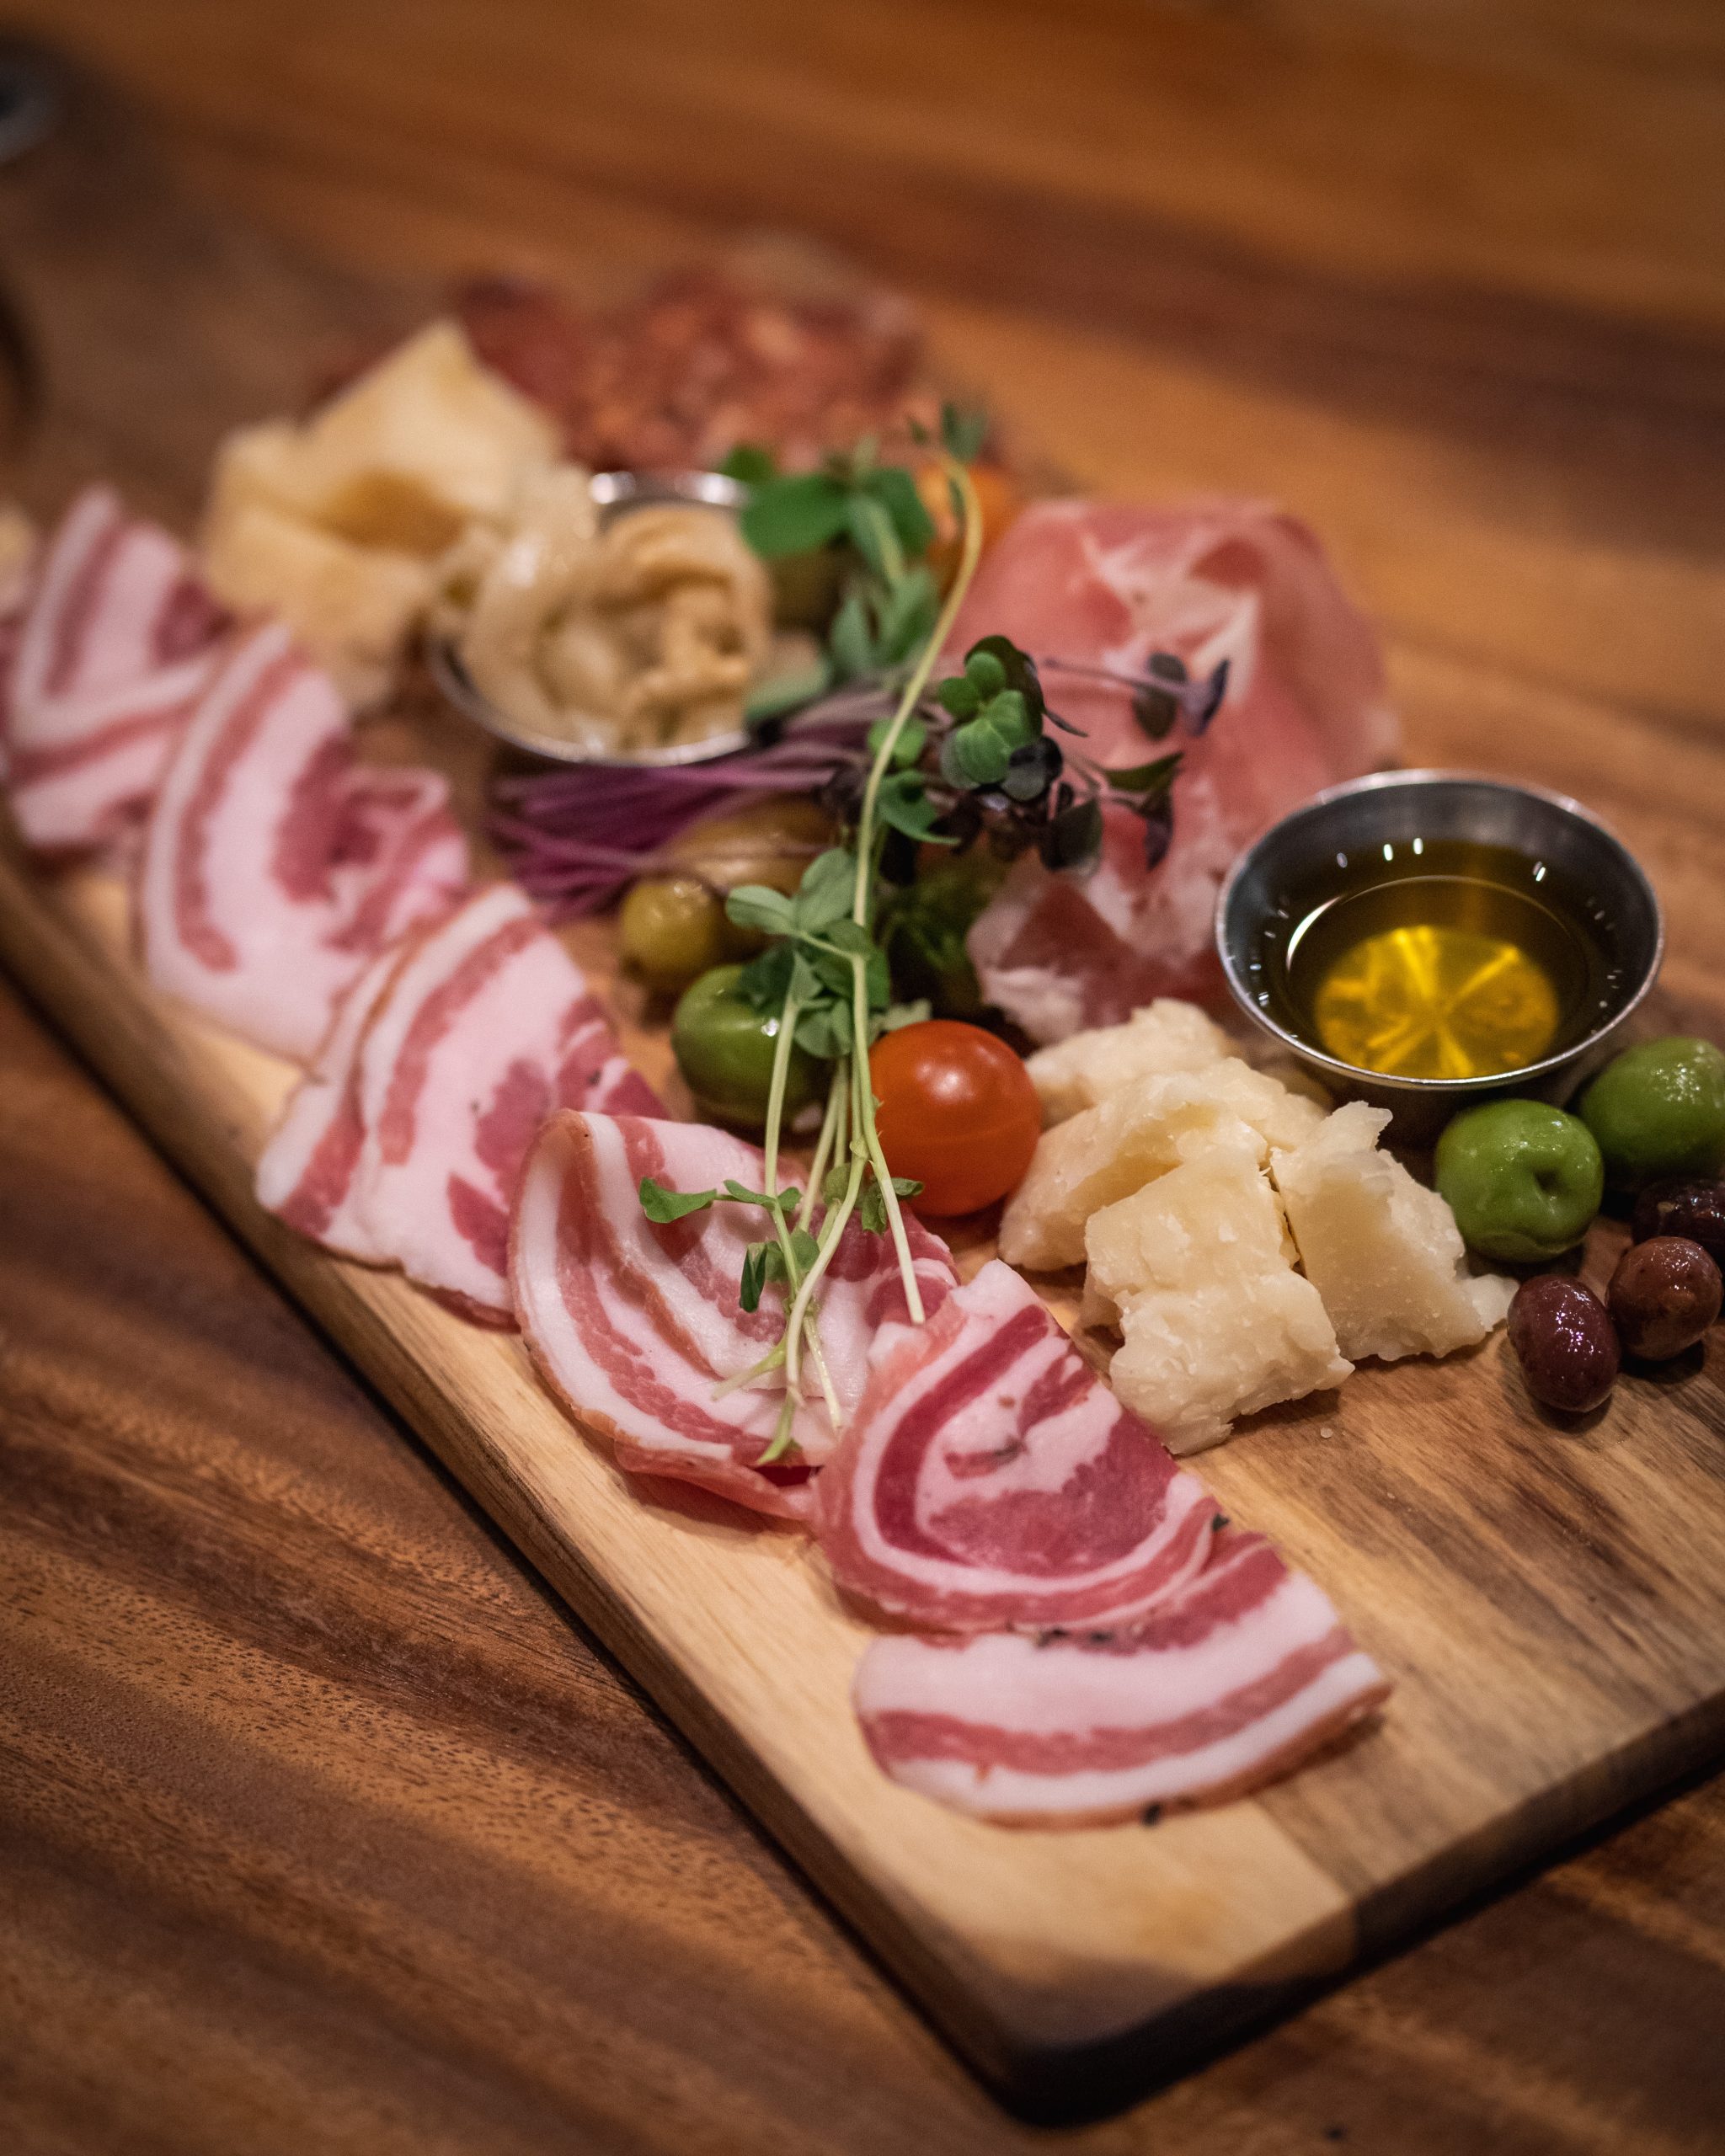 Serve your friends a charcuterie board with cured meets, fresh fruits, roasted vegetables, breads, and dips!